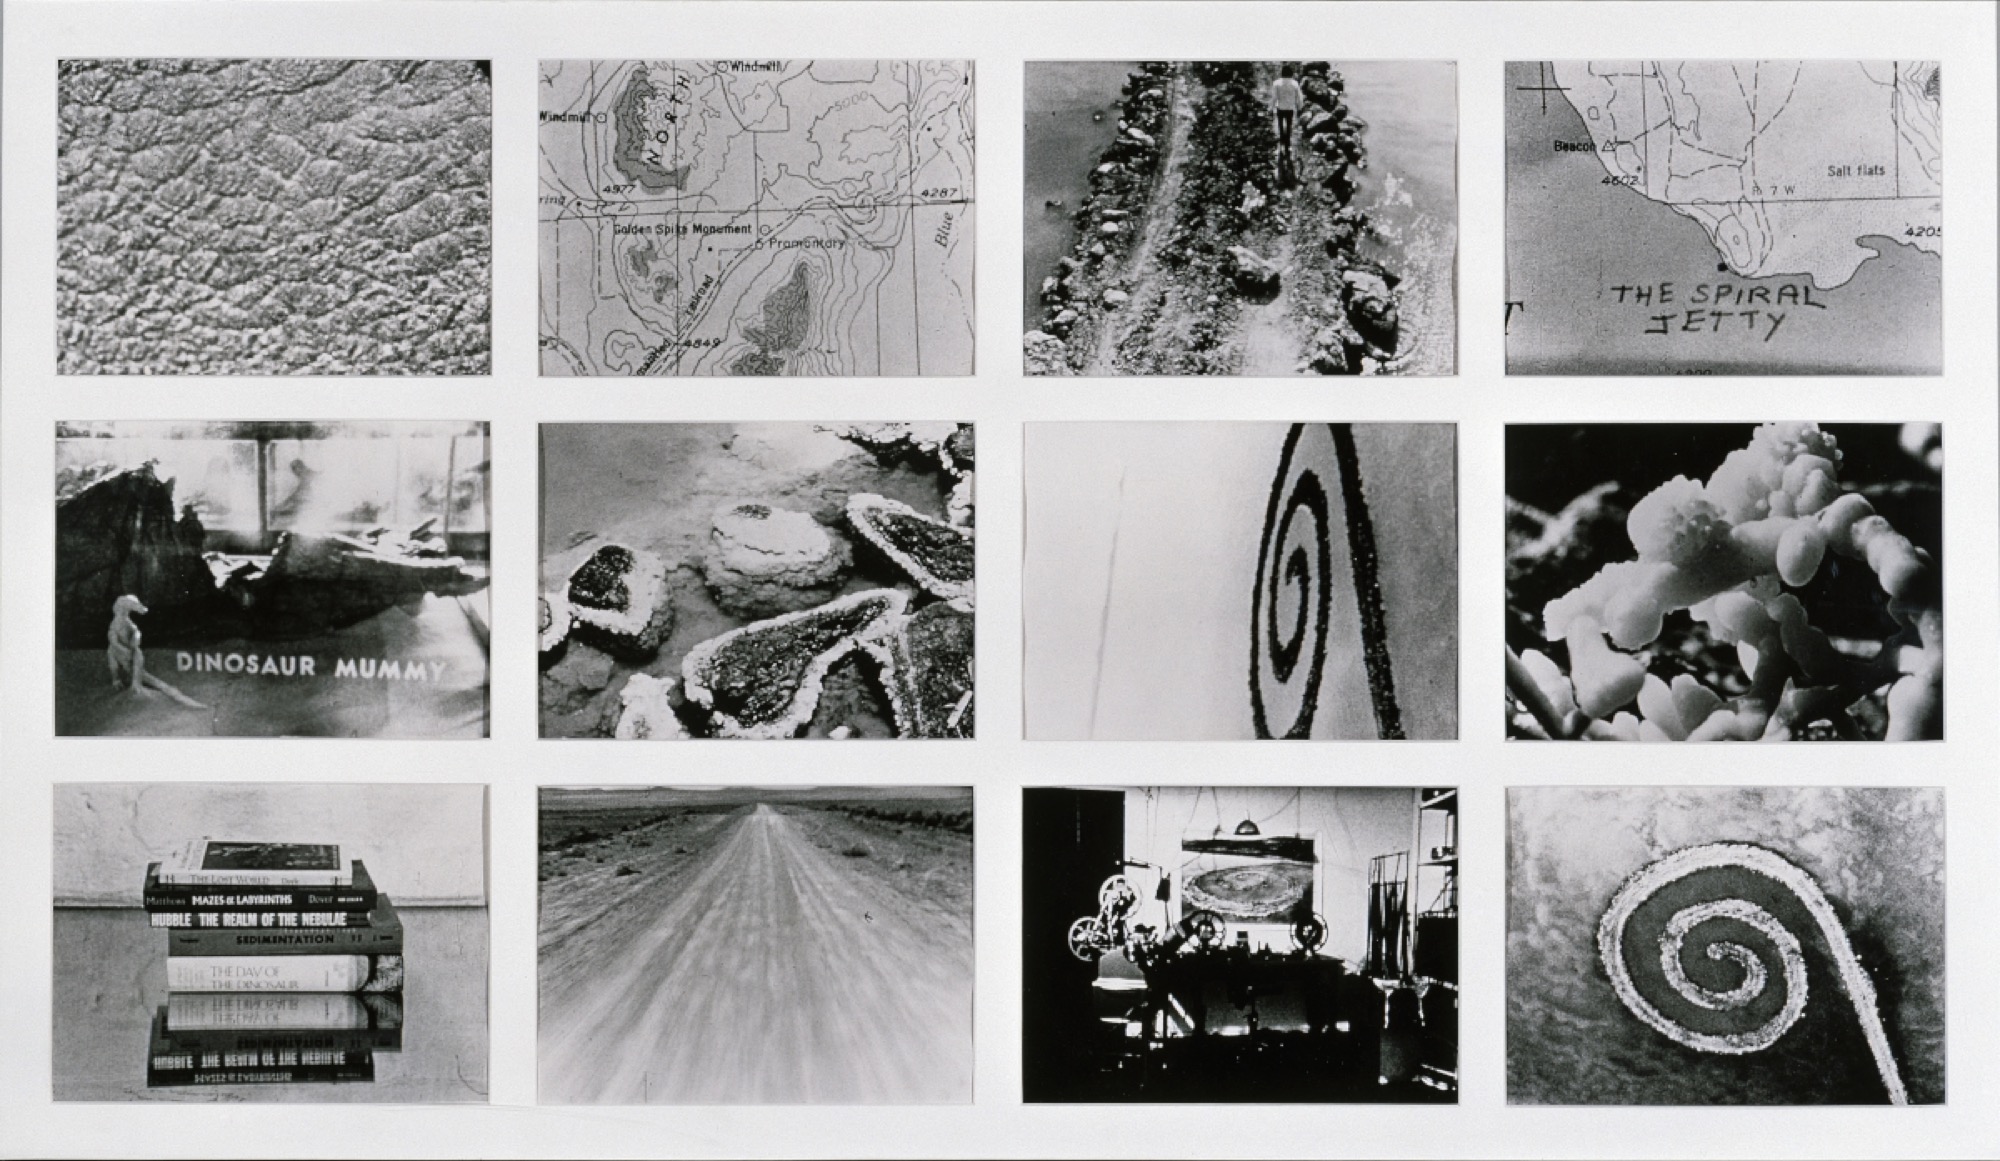 Robert Smithson, <em>Stills from the Spiral Jetty Film</em> 1970 (panel A), gelatin silver photographs, three panels: each with twelve photographs, each panel 66 x 111.8 cm; overall 66 x 345.4 cm. Collection: The National Museum of Art, Architecture and Design, Oslo, Norway. Photo: Morten Thorkildsen. © Holt-Smithson Foundation/VAGA. Licensed by Viscopy, 2017.